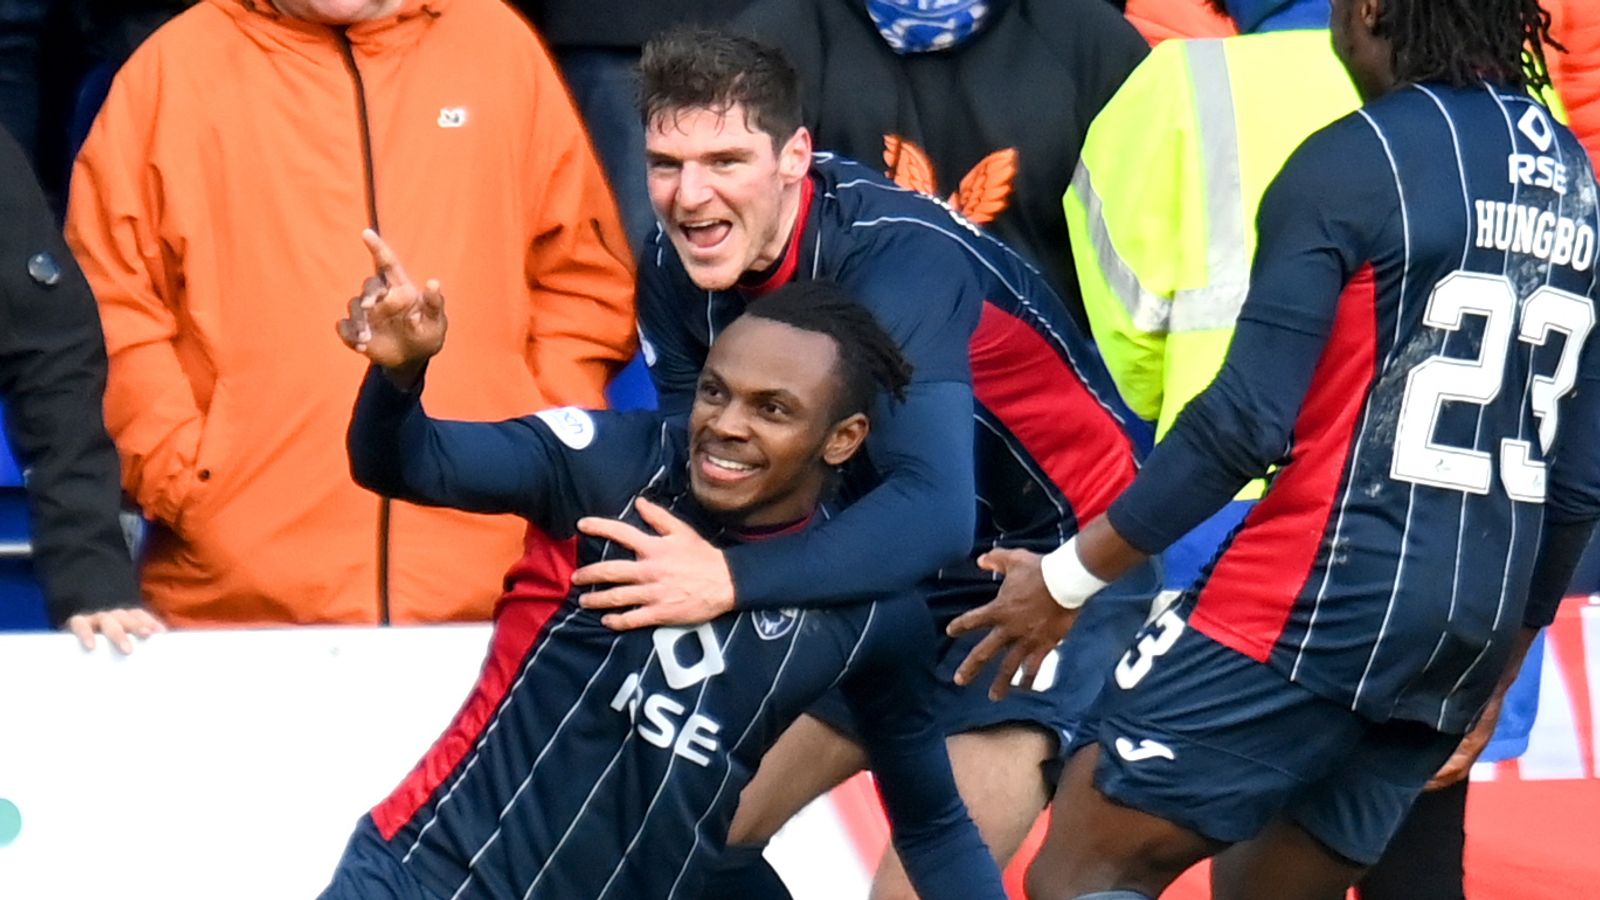 Ross County striker Regan Charles-Cook subjected to racial abuse online after draw with Rangers